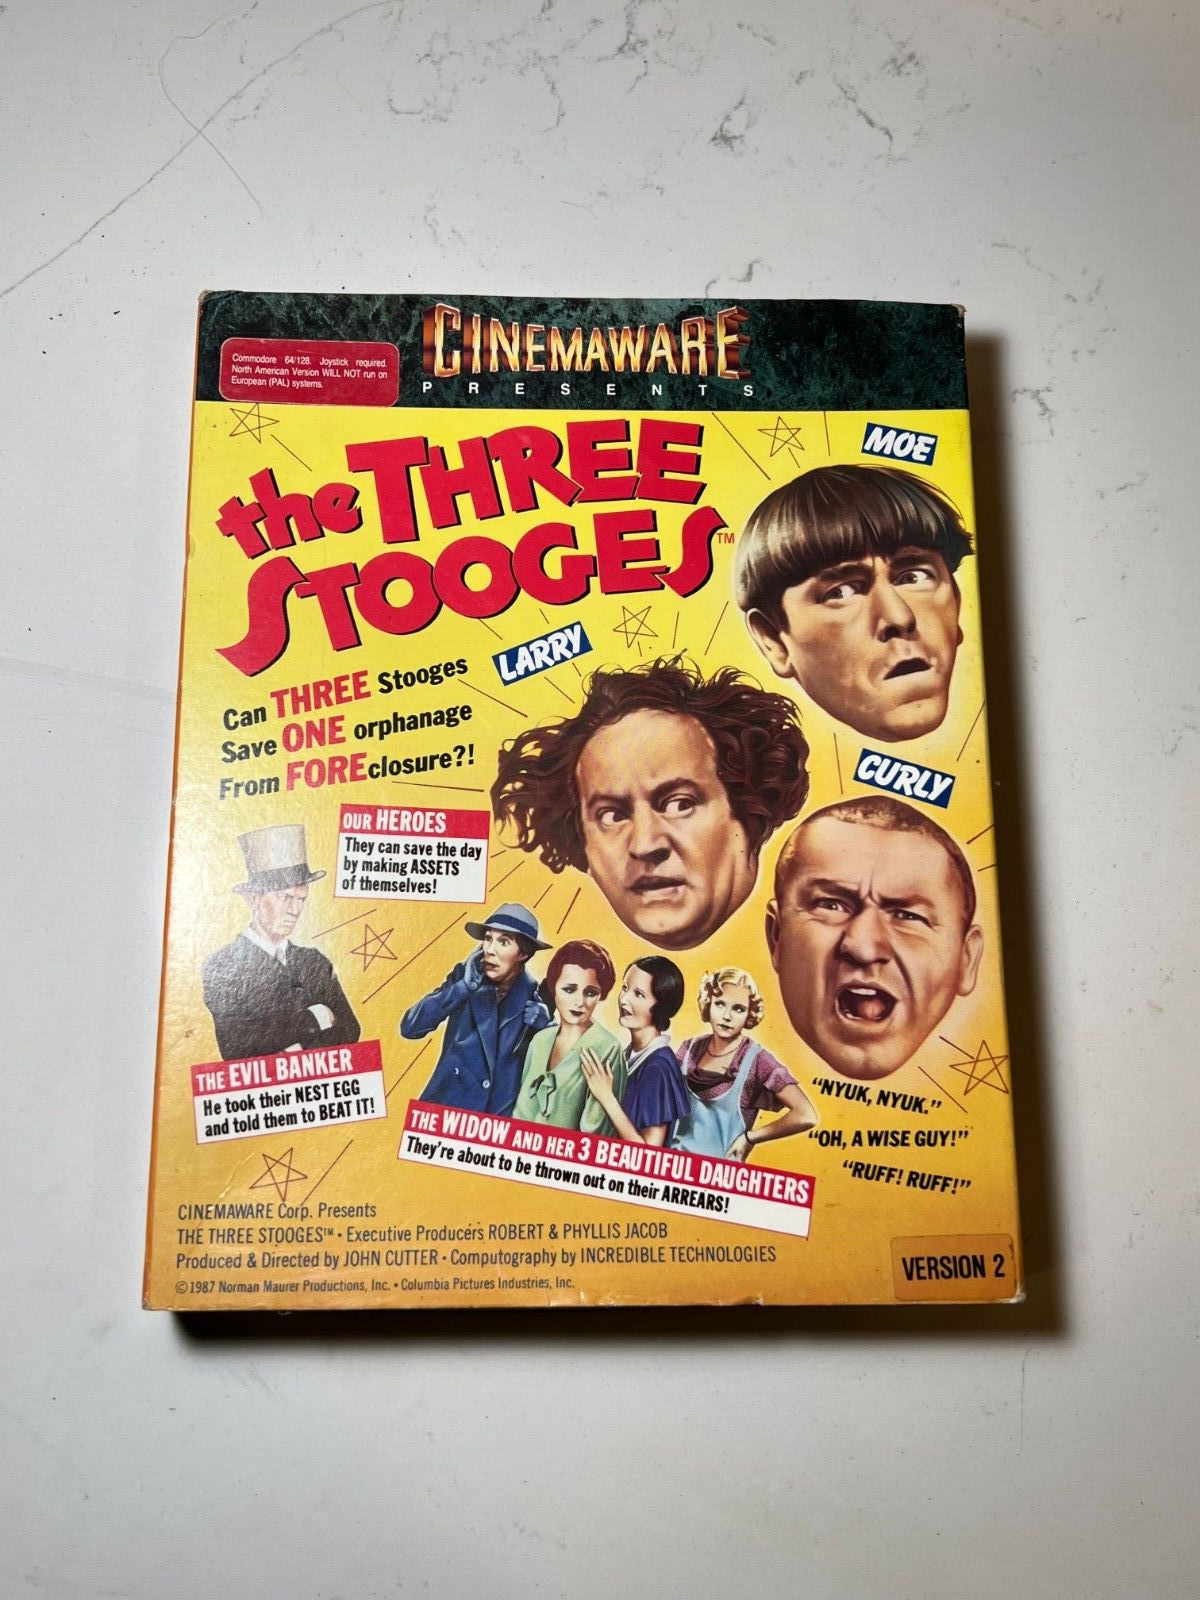 The Three Stooges Cinemaware Commodore 64/128 Computer Game Floppy Disk UNTESTED